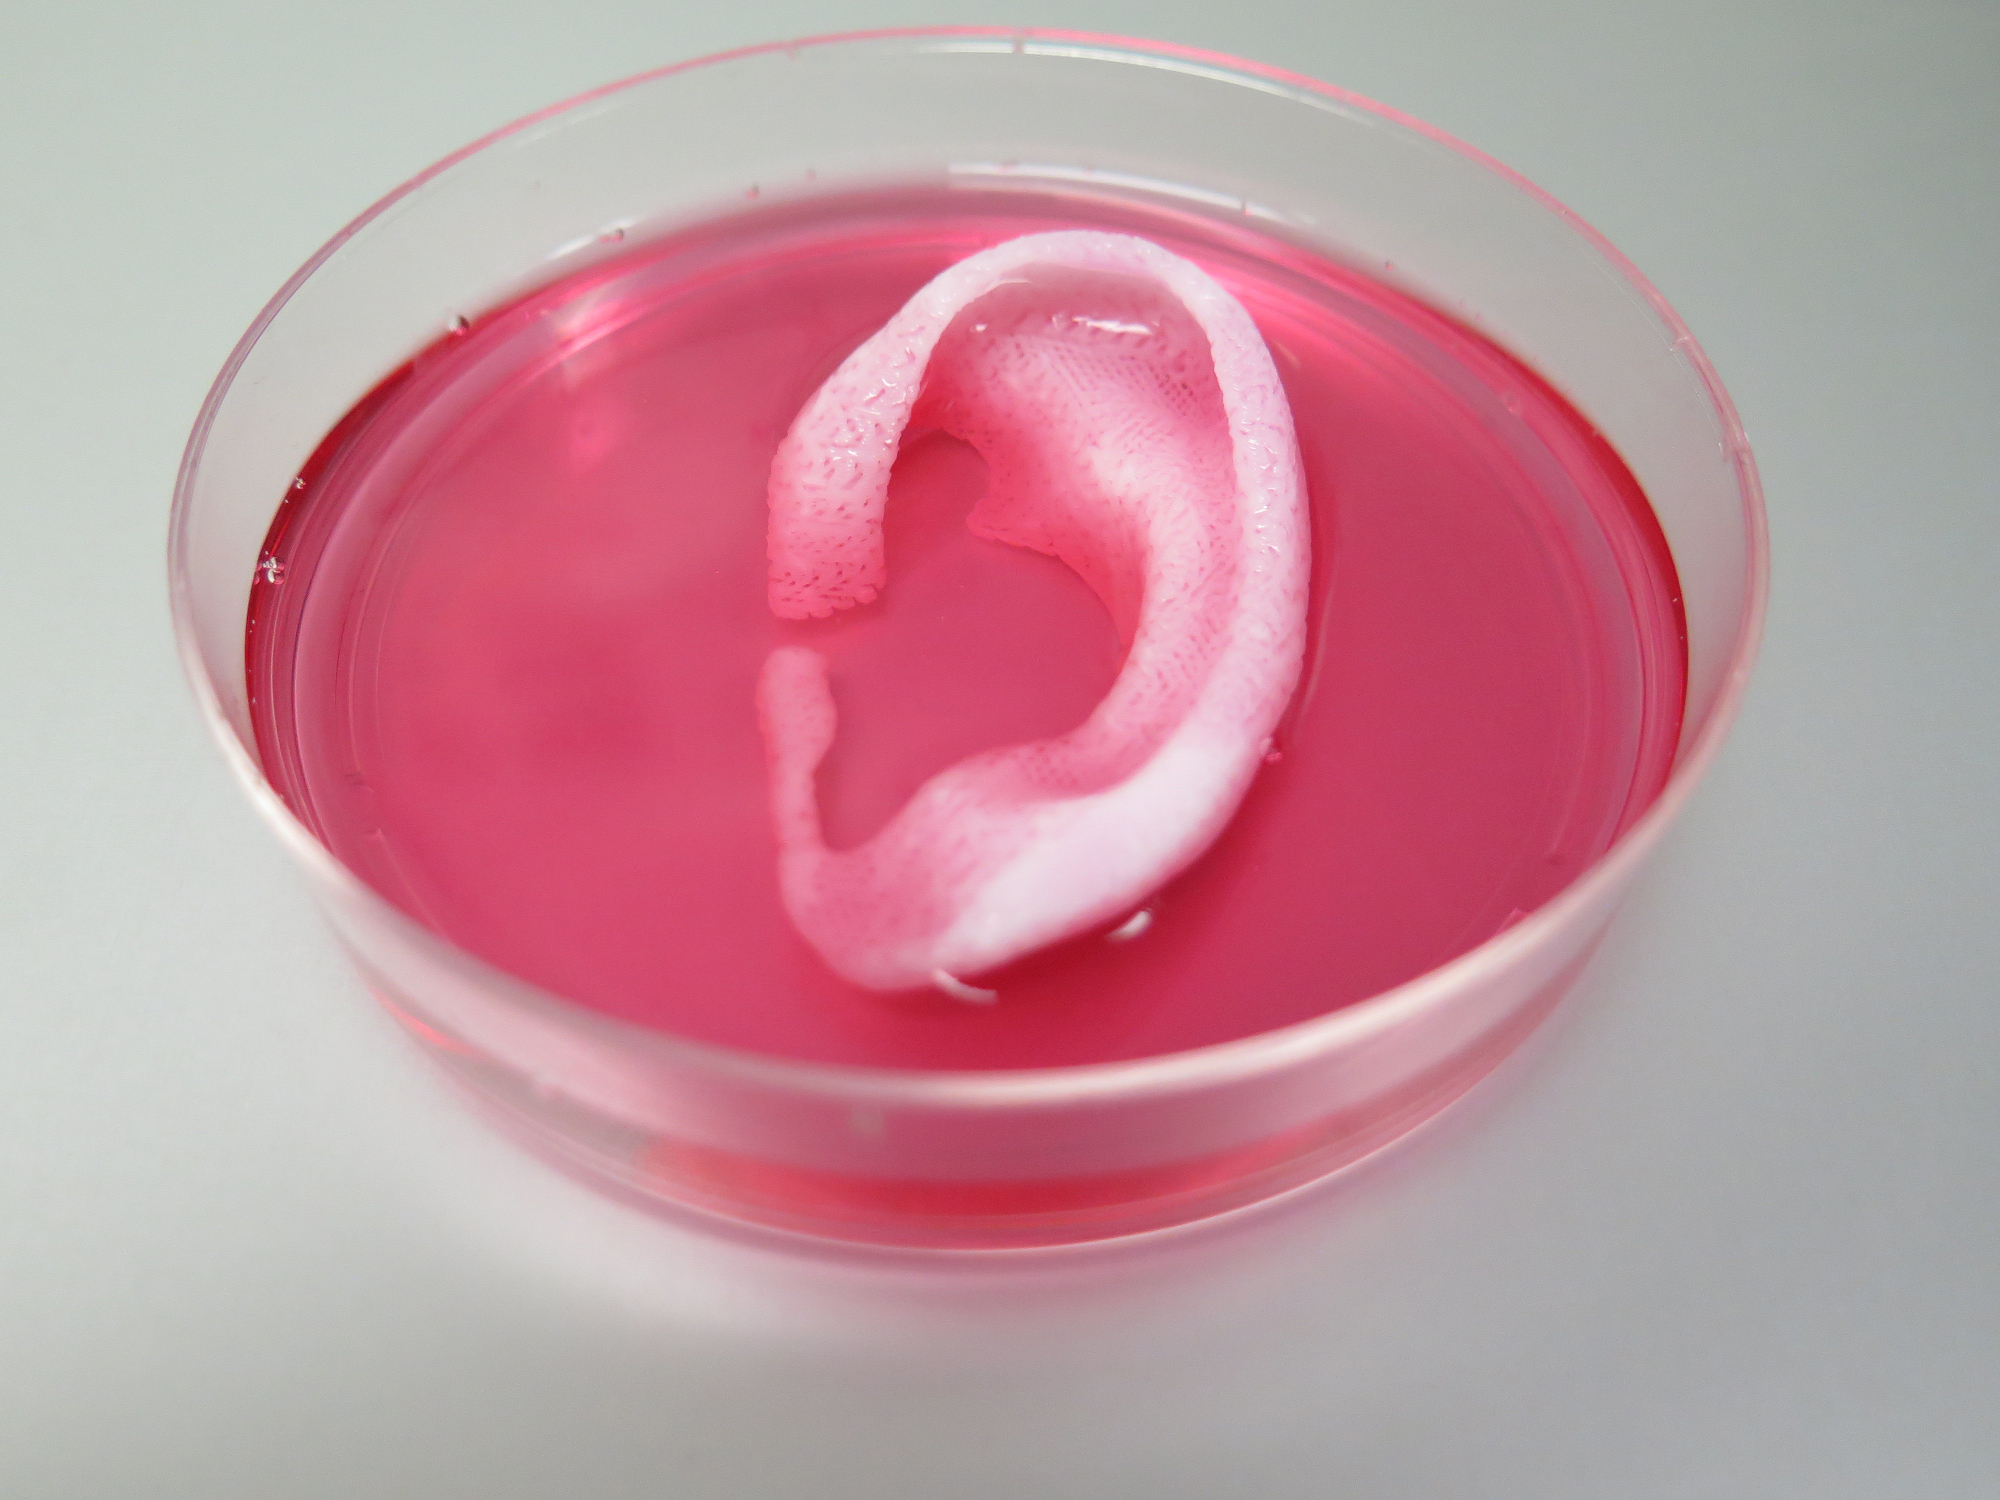 Completed ear structure printed with the Integrated Tissue-Organ Printing System. Photo by Wake Forest Institute for Regenerative Medicine